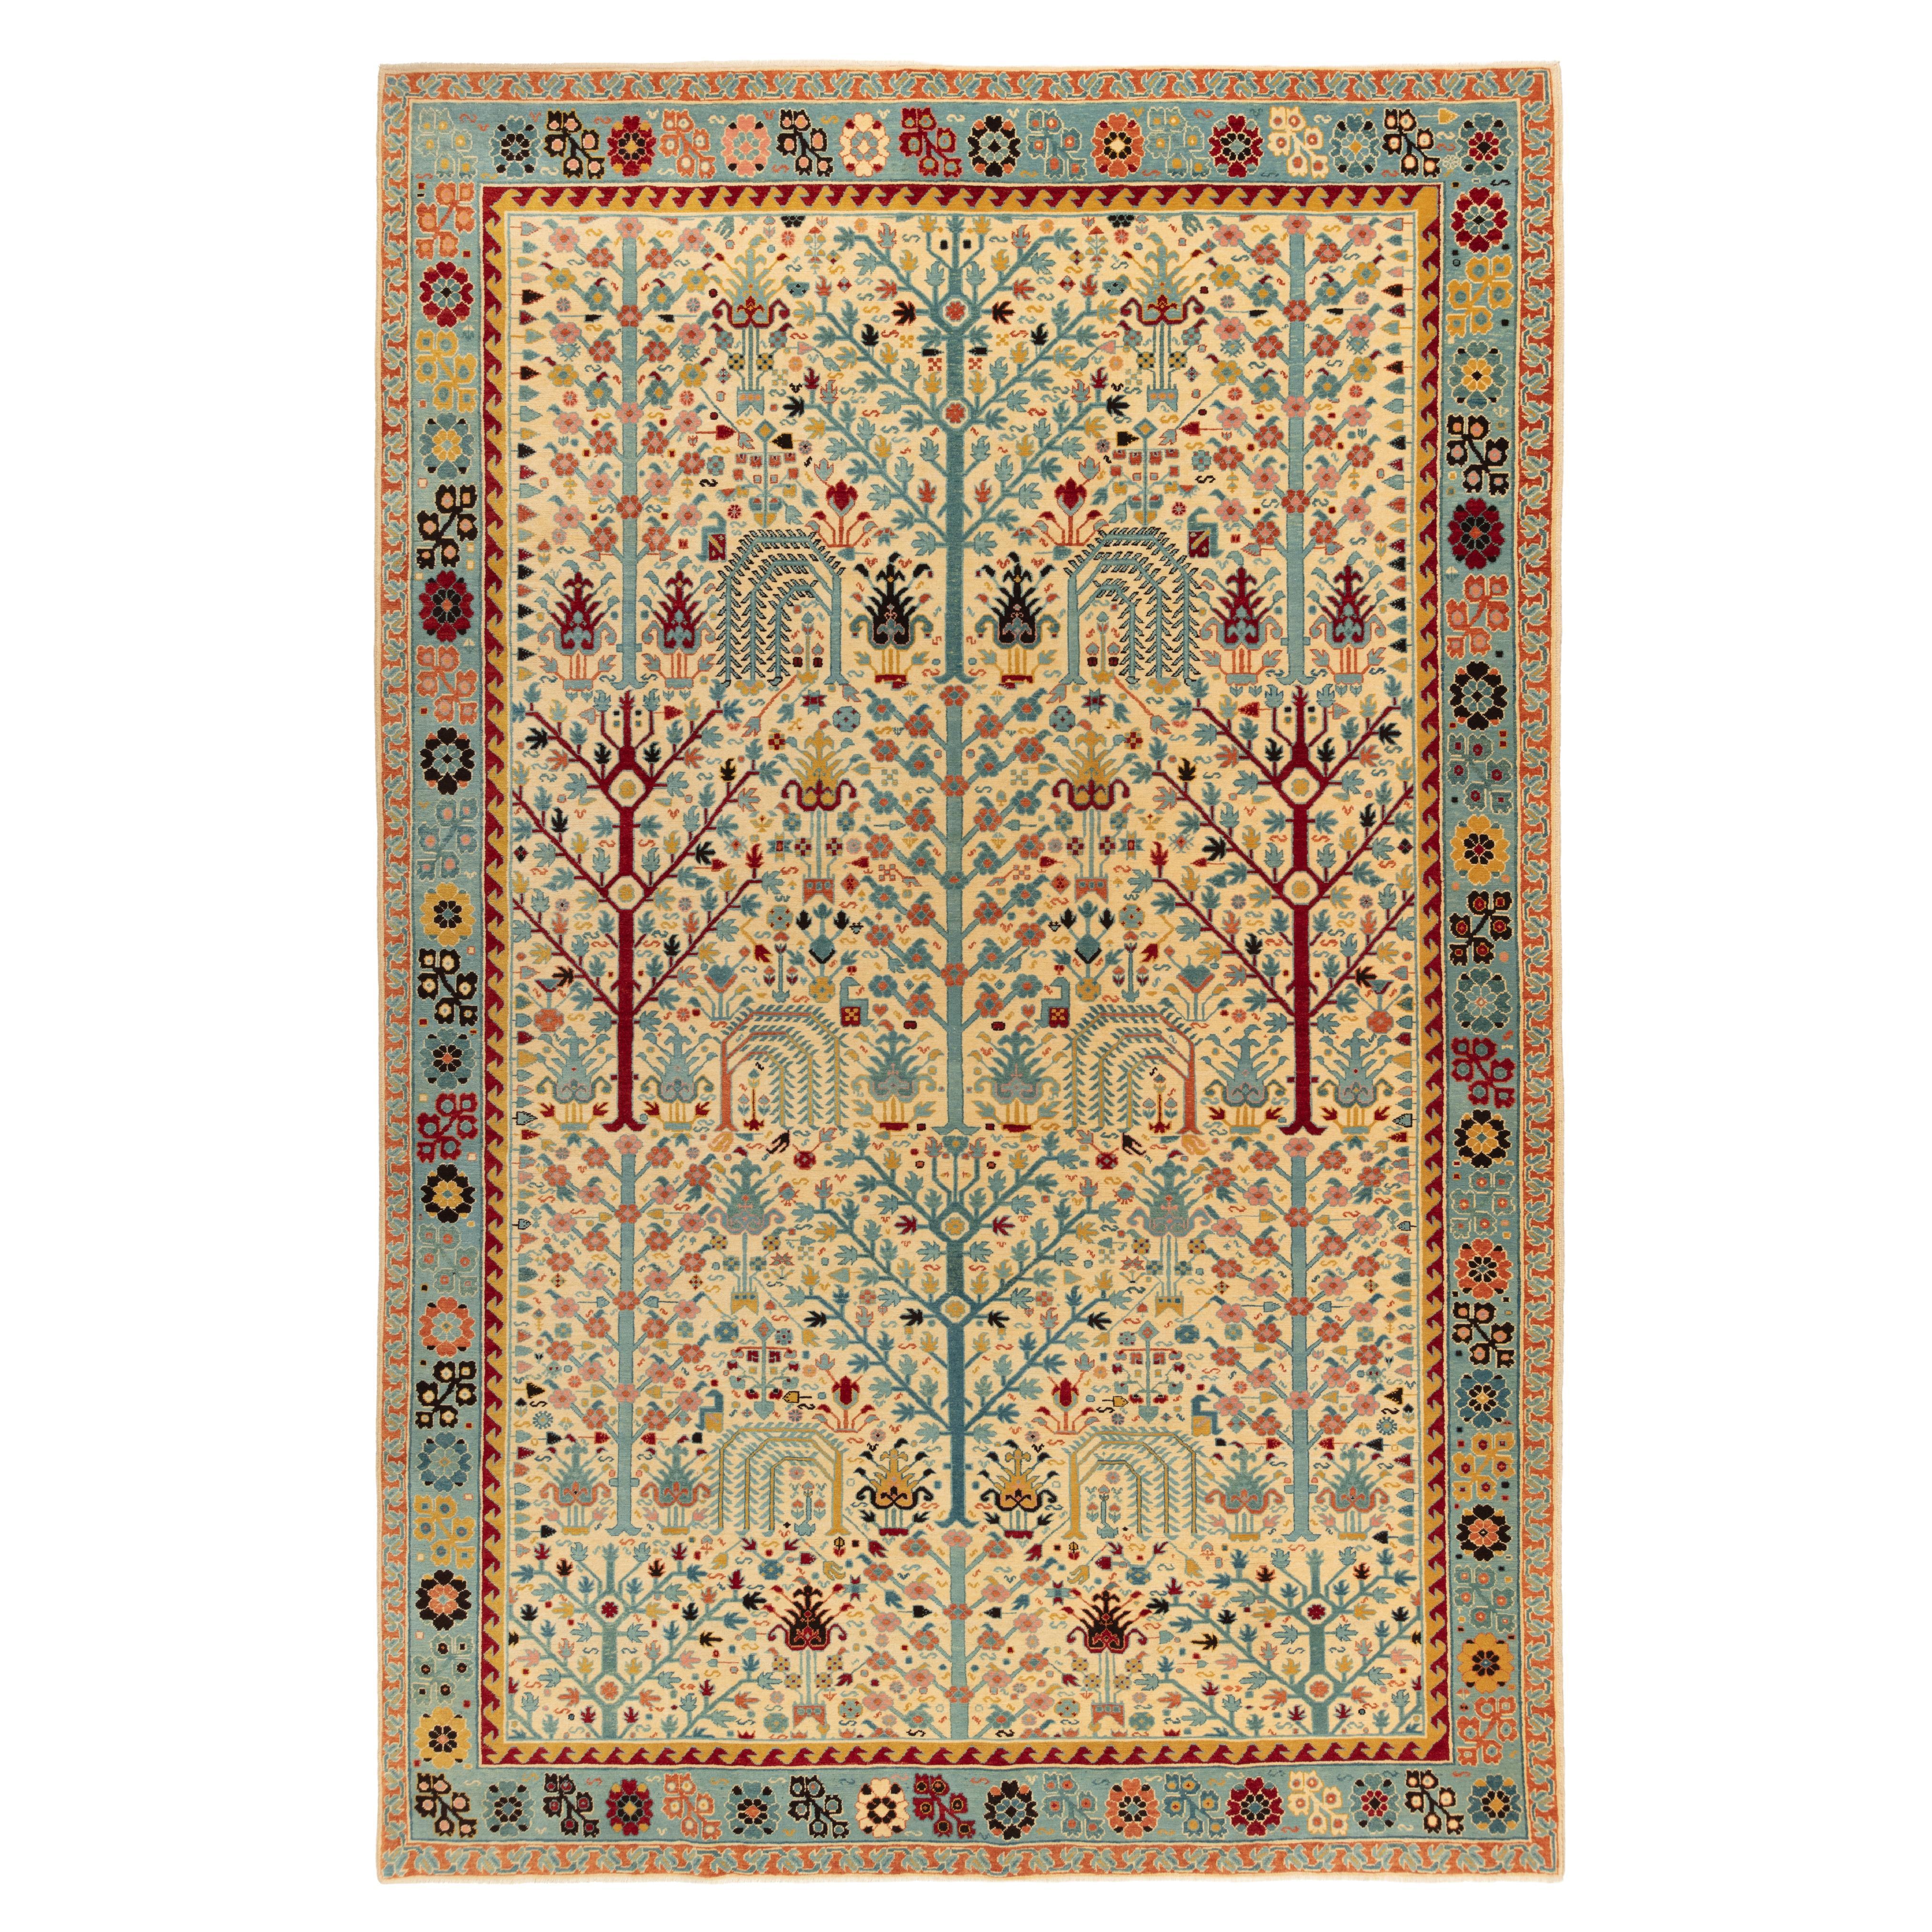 Ararat Rugs Bid Majnum on White Field Rug, 17th Century Revival, Natural Dyed For Sale